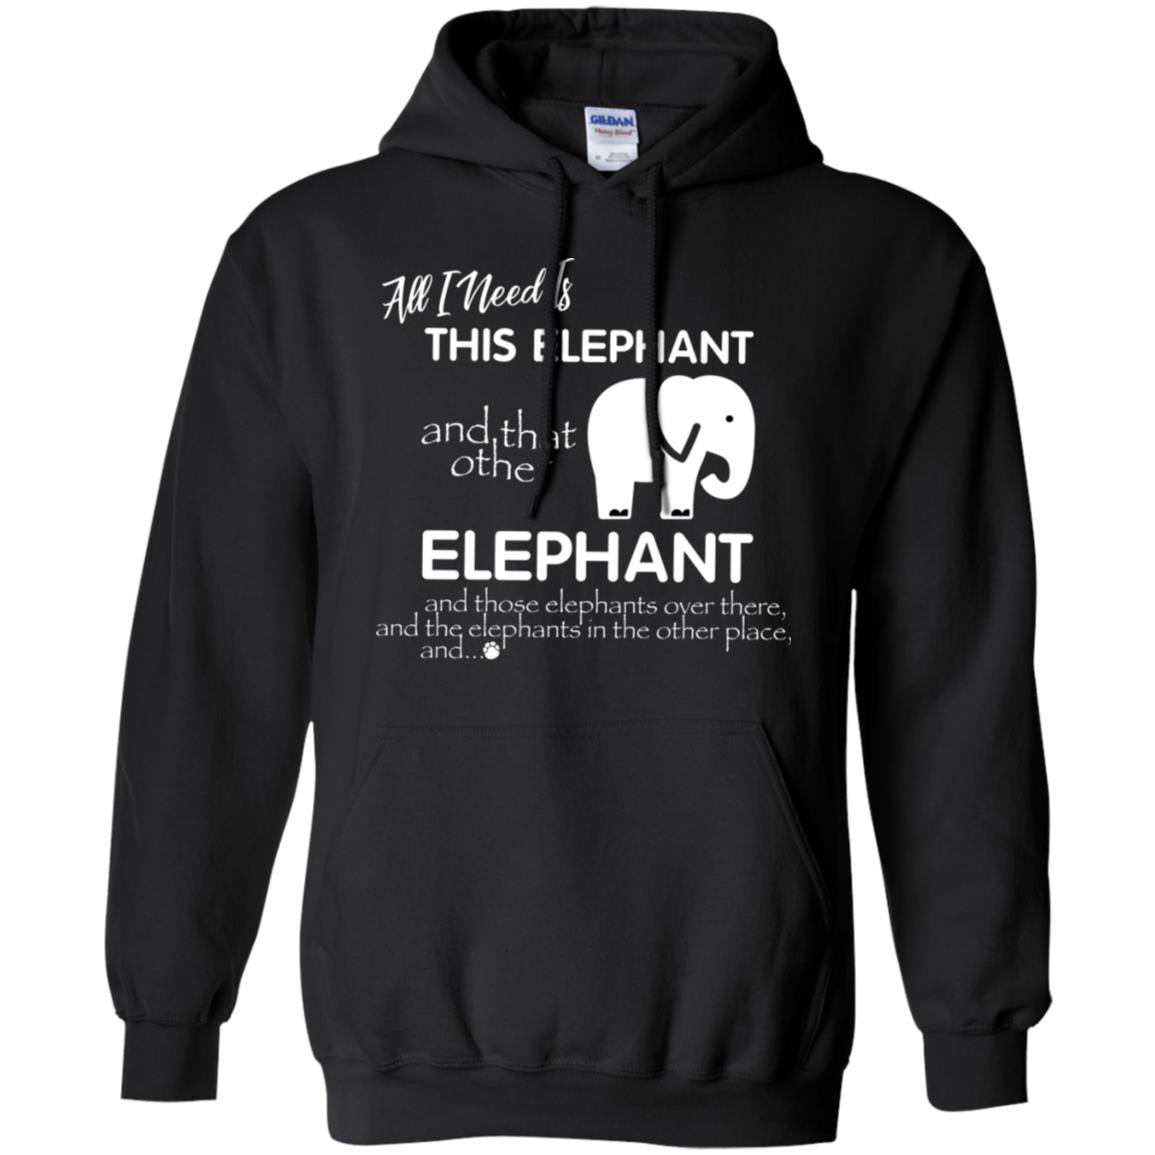 All I Need Is This Elephant And That Other Elephant Shirt For Elephant LoversG185 Gildan Pullover Hoodie 8 oz.